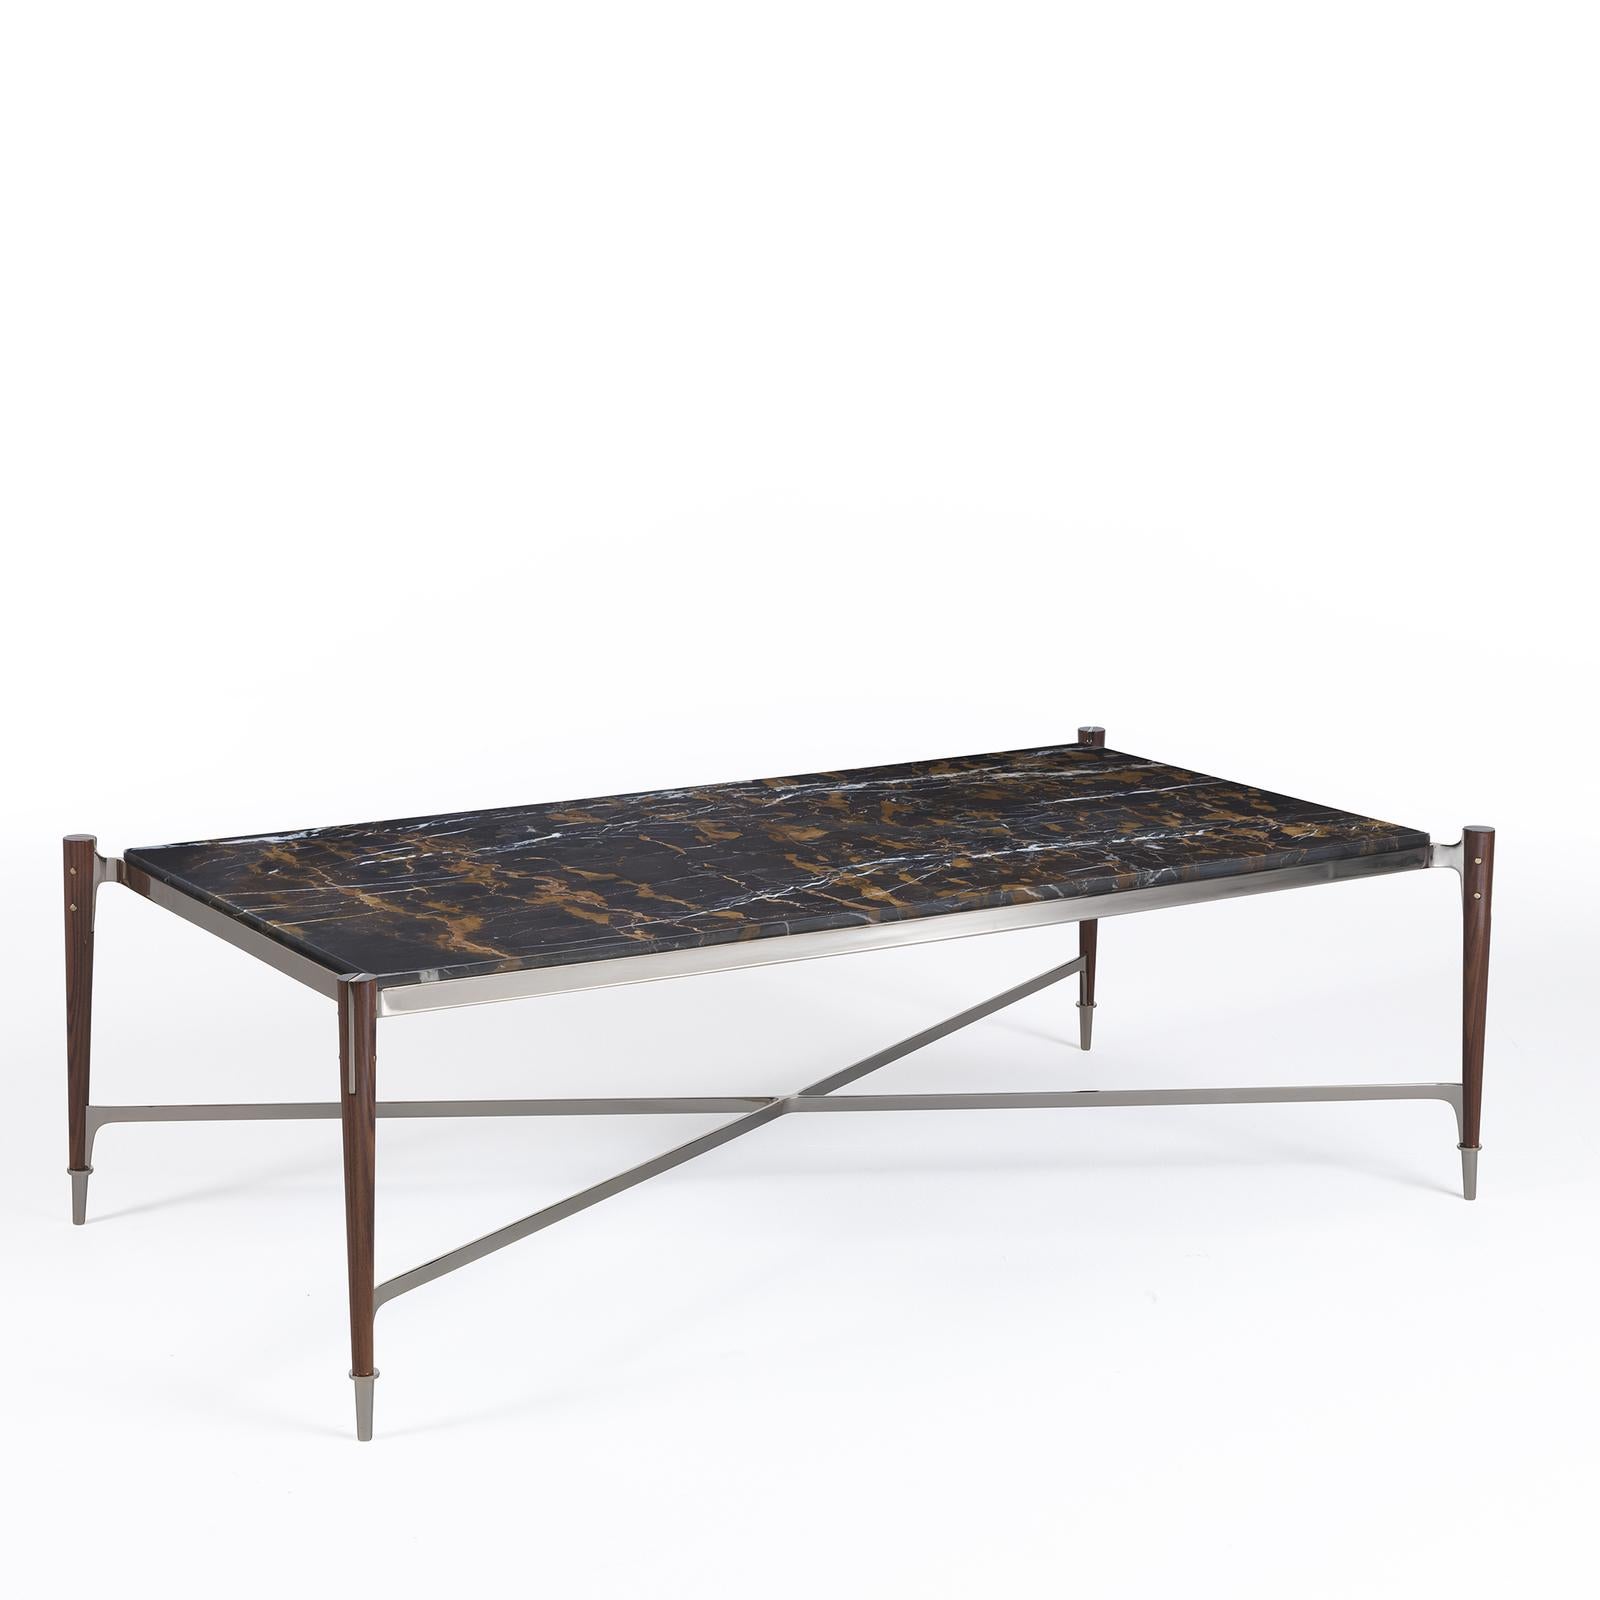 Meticulously designed by expert craftsmen, this table is characterized by balanced forms and prized materials. Fashioned of black and gold marble, the bold rectangular top is encased in an iron rim and supported by tapered legs in solid dark